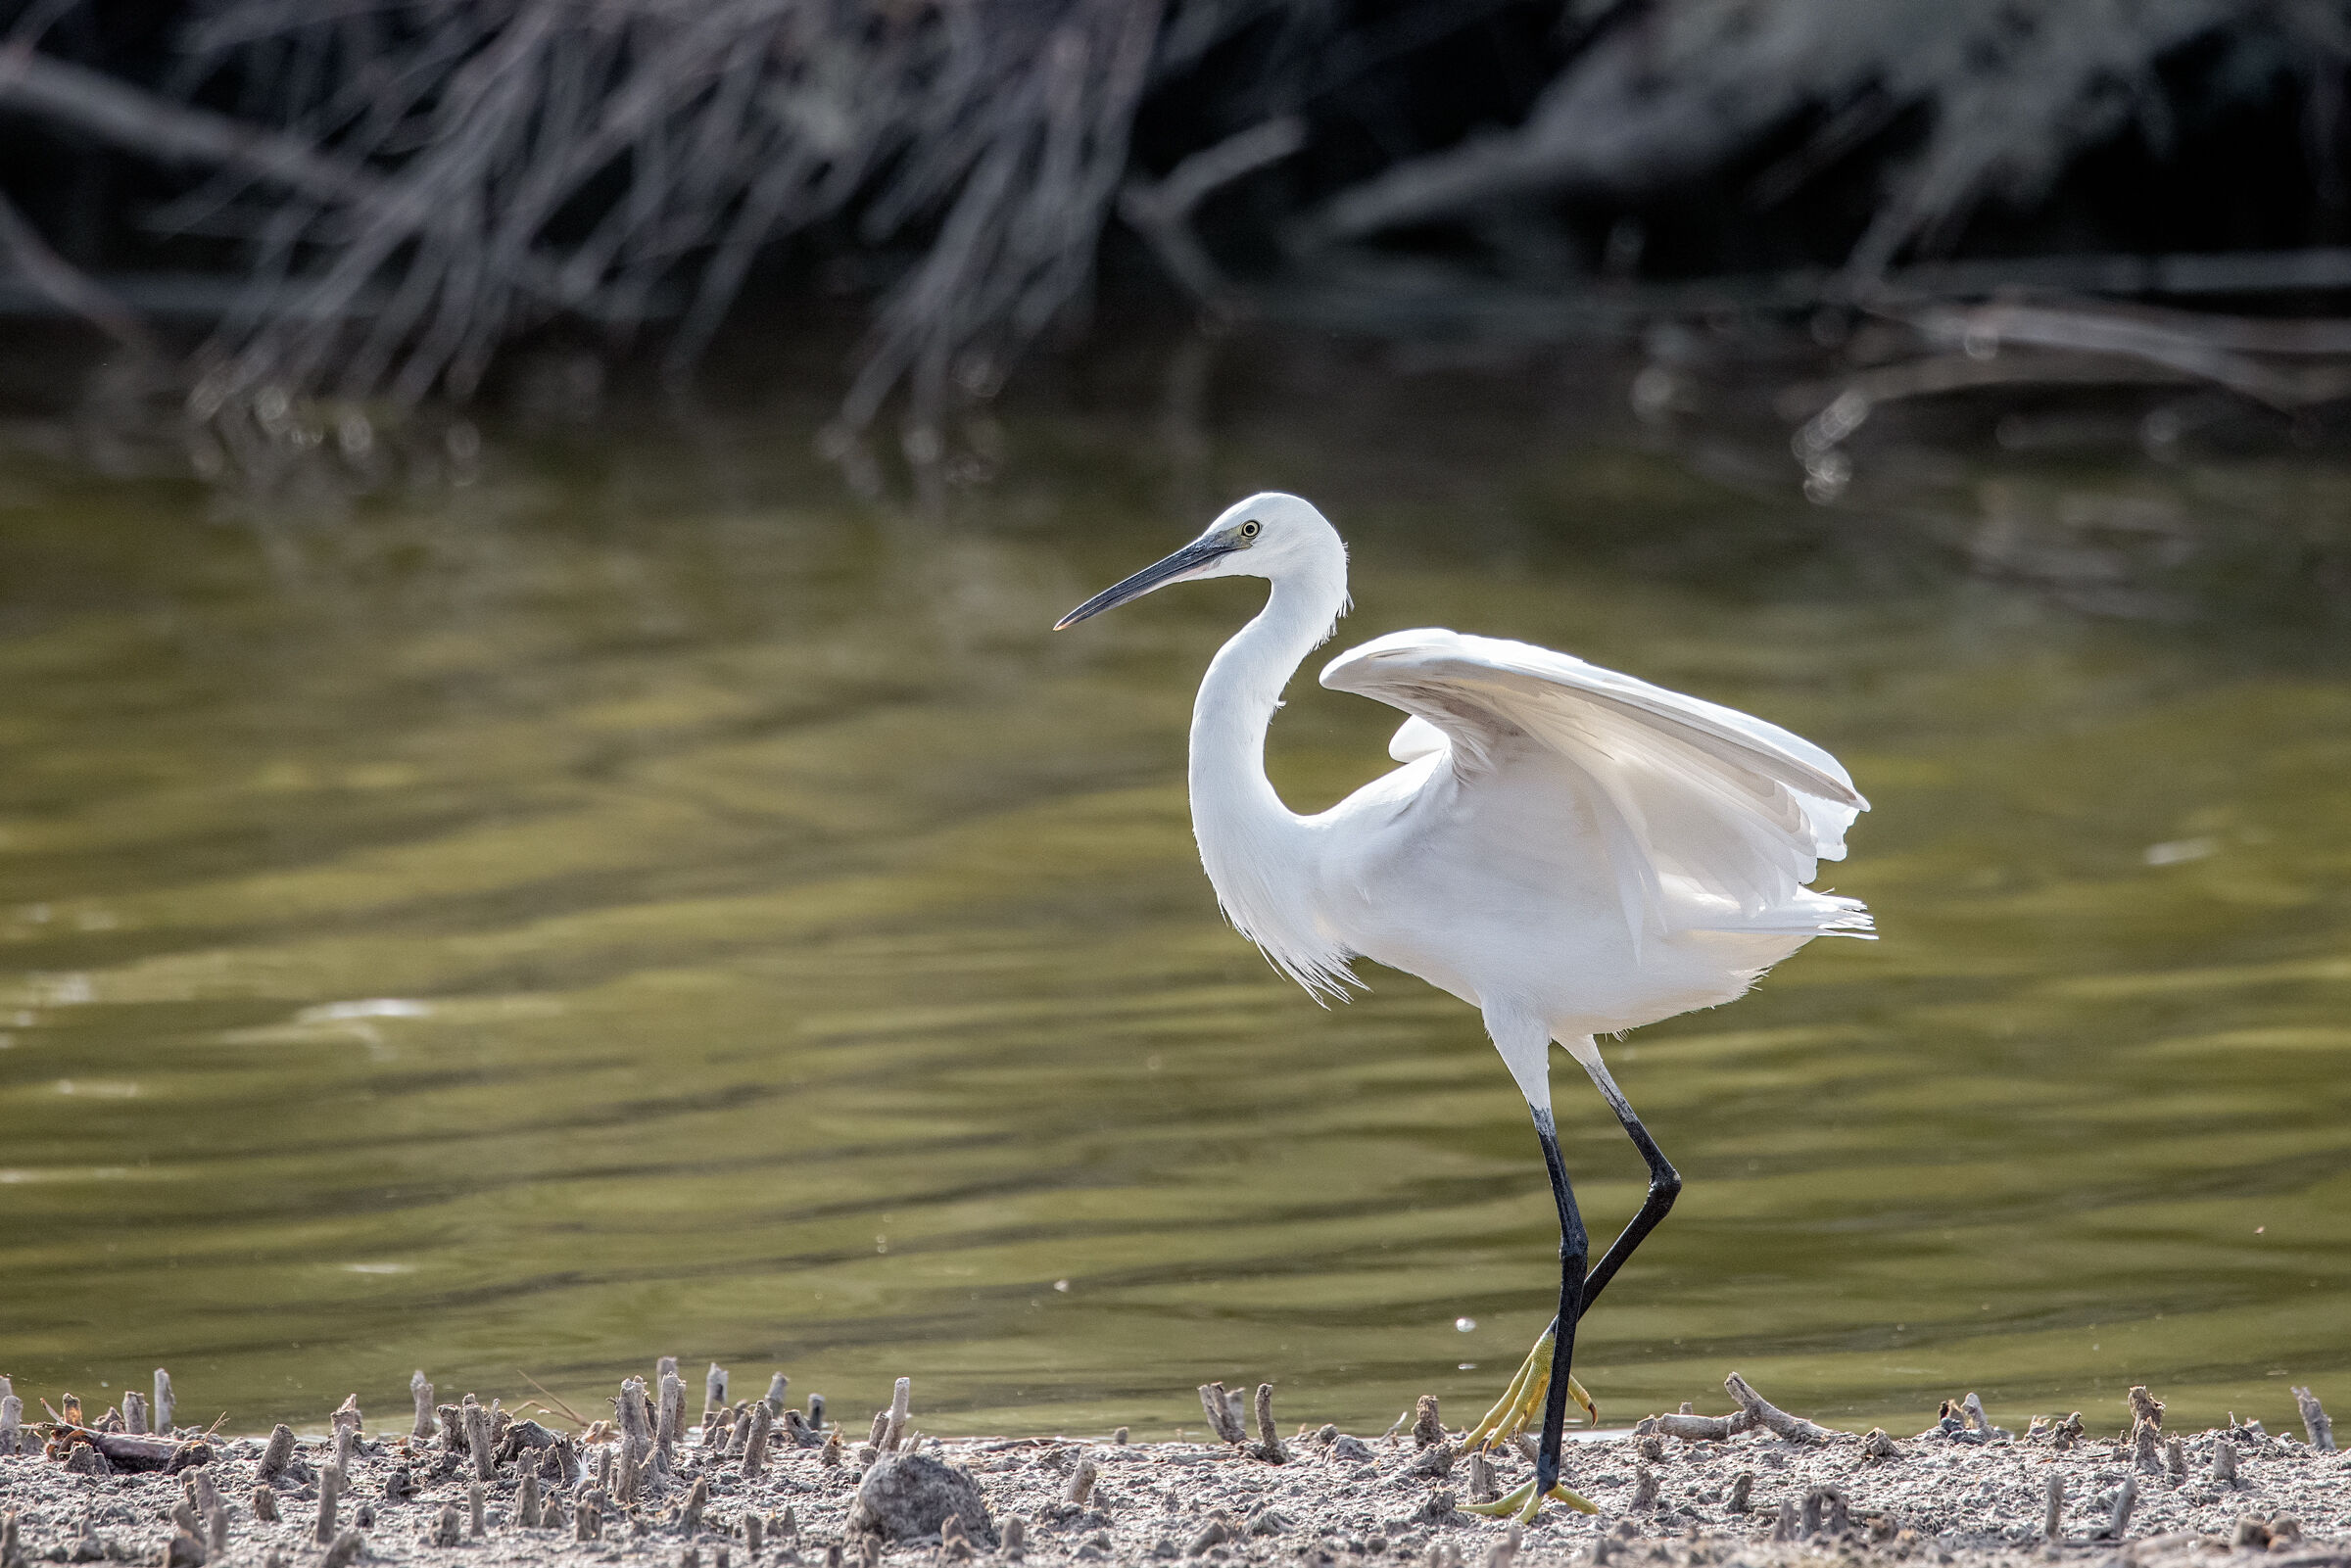 the dance of the egret...